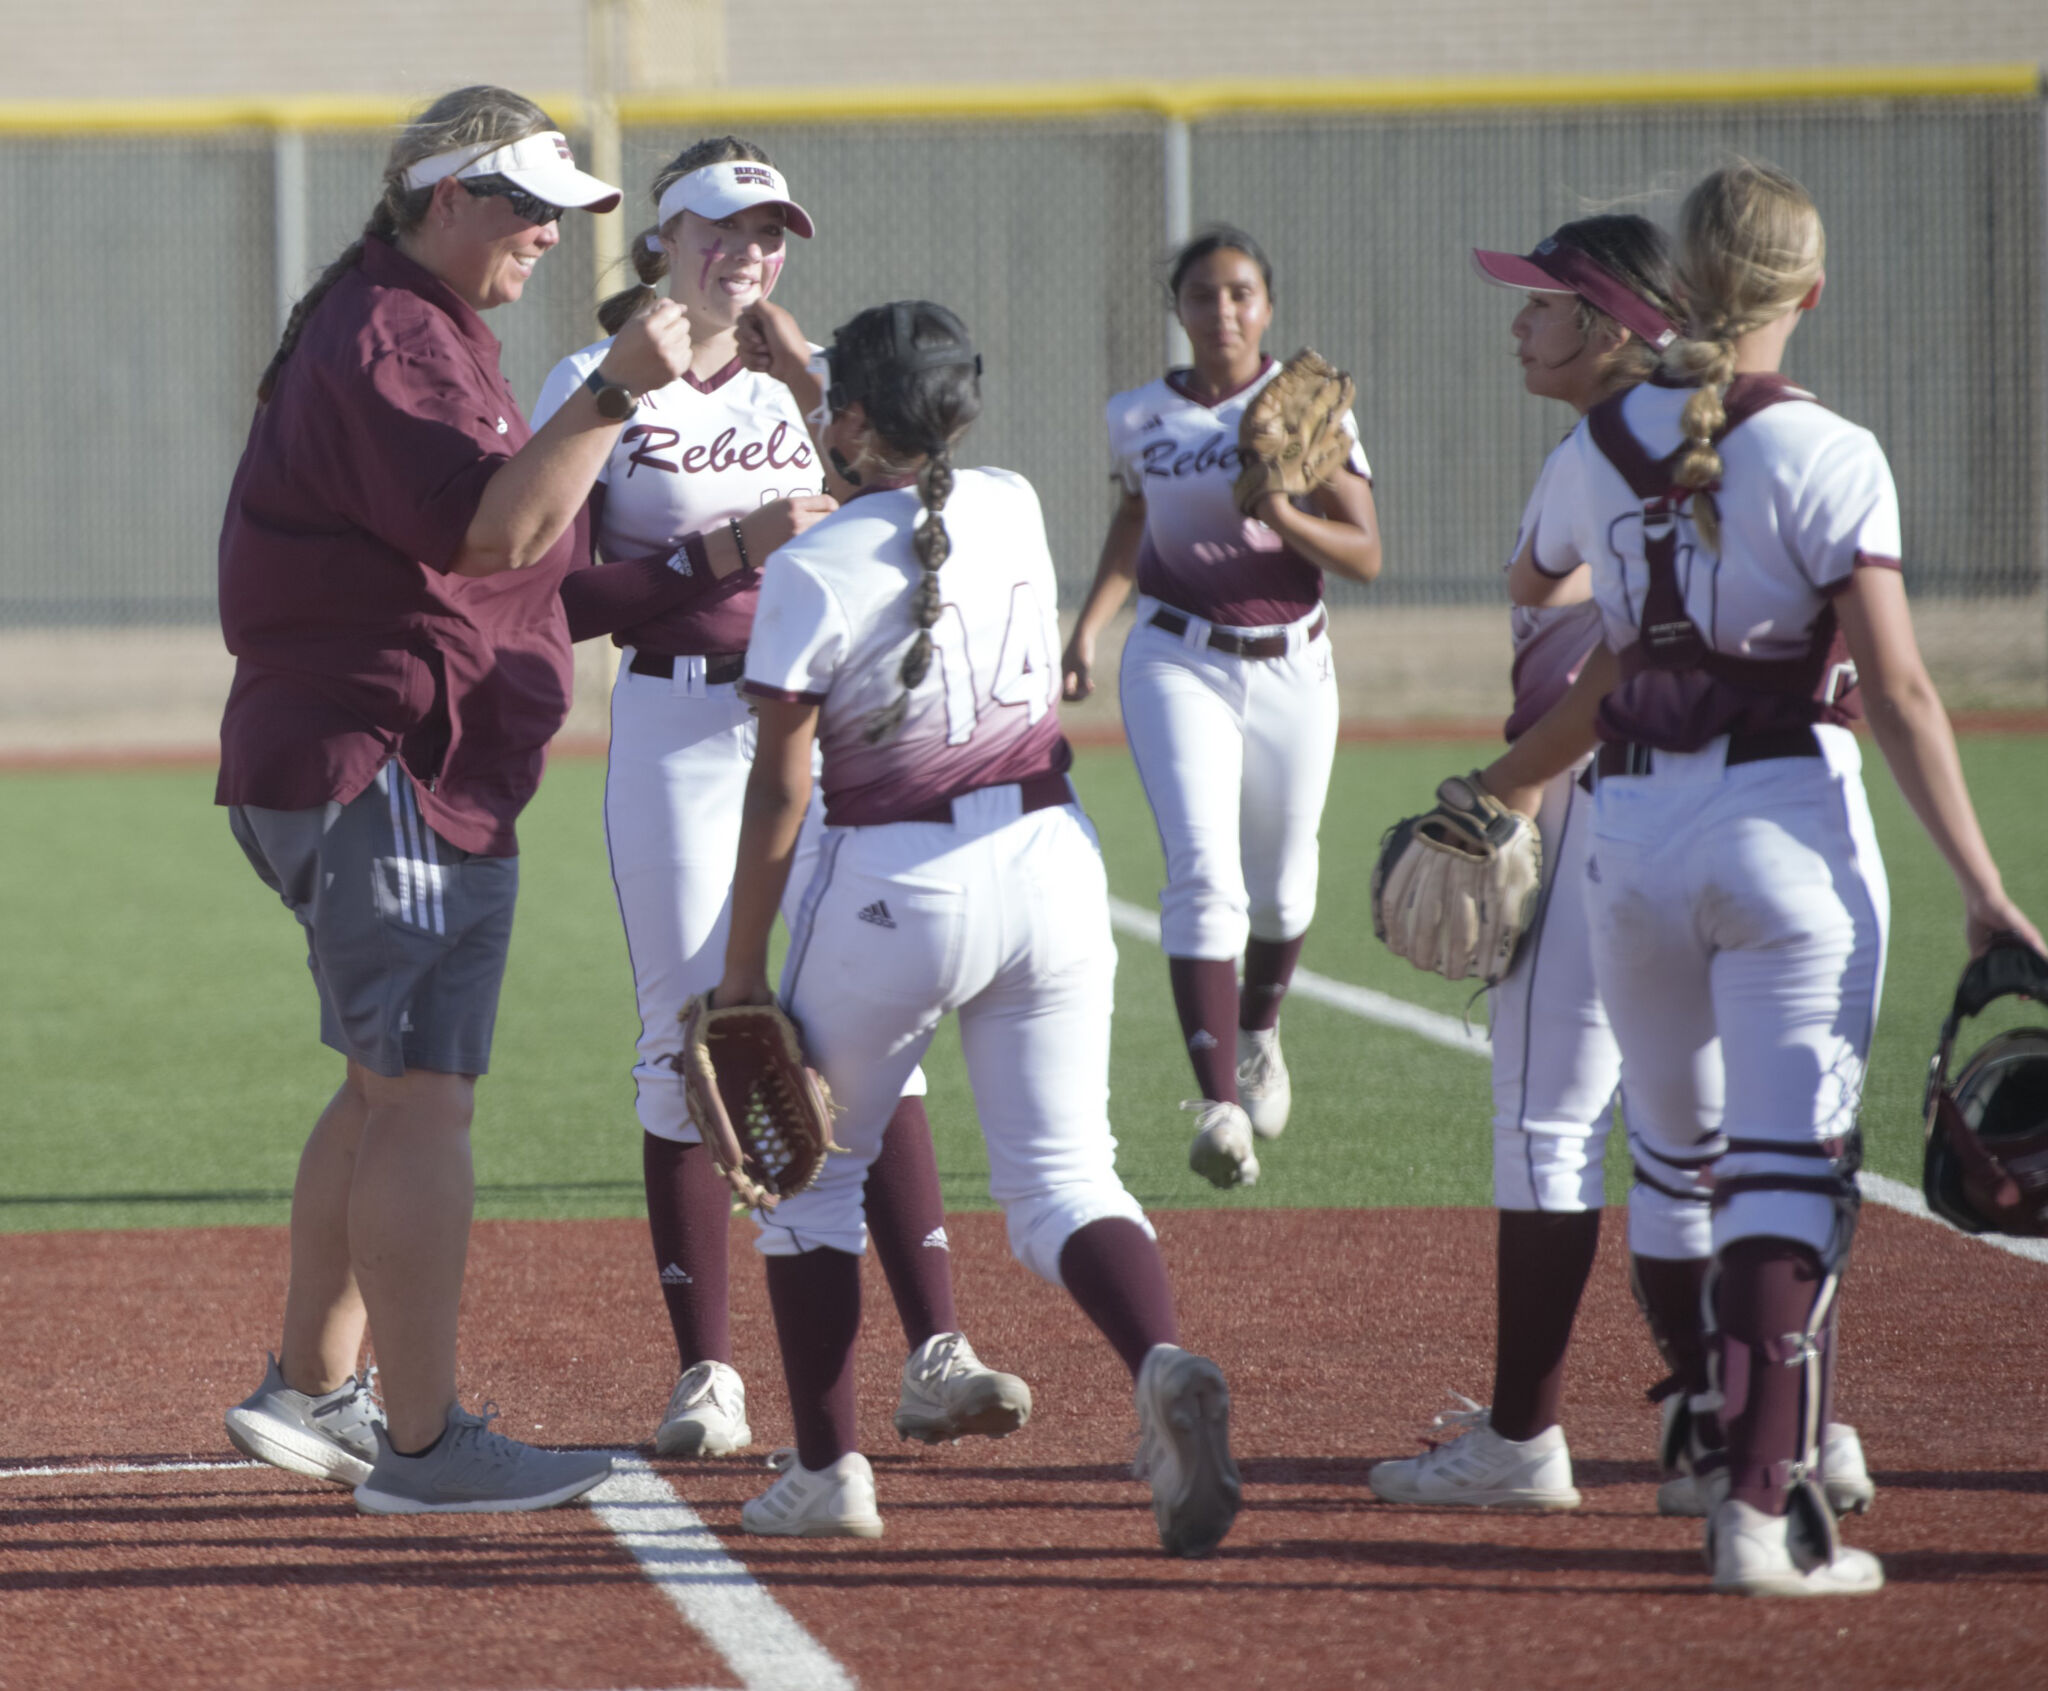 MISD reiterates LHS softball did not violate UIL rules, apologizes